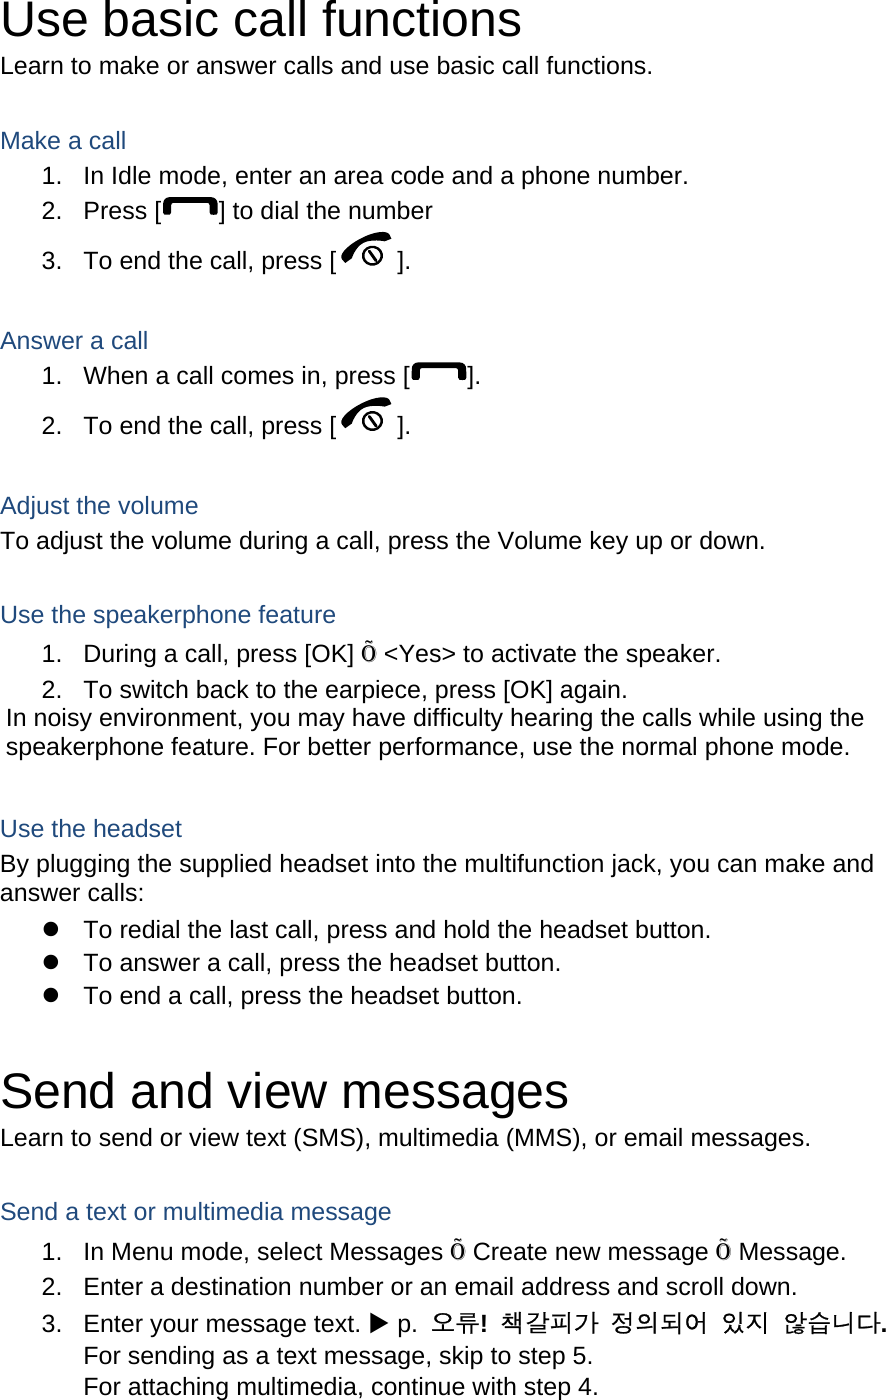 Use basic call functions Learn to make or answer calls and use basic call functions.  Make a call 1.  In Idle mode, enter an area code and a phone number. 2. Press [ ] to dial the number 3.  To end the call, press [ ].   Answer a call 1.  When a call comes in, press [ ]. 2.  To end the call, press [ ].  Adjust the volume To adjust the volume during a call, press the Volume key up or down.  Use the speakerphone feature 1.  During a call, press [OK] Õ &lt;Yes&gt; to activate the speaker. 2.  To switch back to the earpiece, press [OK] again. In noisy environment, you may have difficulty hearing the calls while using the speakerphone feature. For better performance, use the normal phone mode.  Use the headset By plugging the supplied headset into the multifunction jack, you can make and answer calls: z  To redial the last call, press and hold the headset button. z  To answer a call, press the headset button. z  To end a call, press the headset button.  Send and view messages Learn to send or view text (SMS), multimedia (MMS), or email messages.  Send a text or multimedia message 1.  In Menu mode, select Messages Õ Create new message Õ Message. 2.  Enter a destination number or an email address and scroll down. 3.  Enter your message text. X p.  오류!  책갈피가 정의되어 있지 않습니다. For sending as a text message, skip to step 5. For attaching multimedia, continue with step 4. 